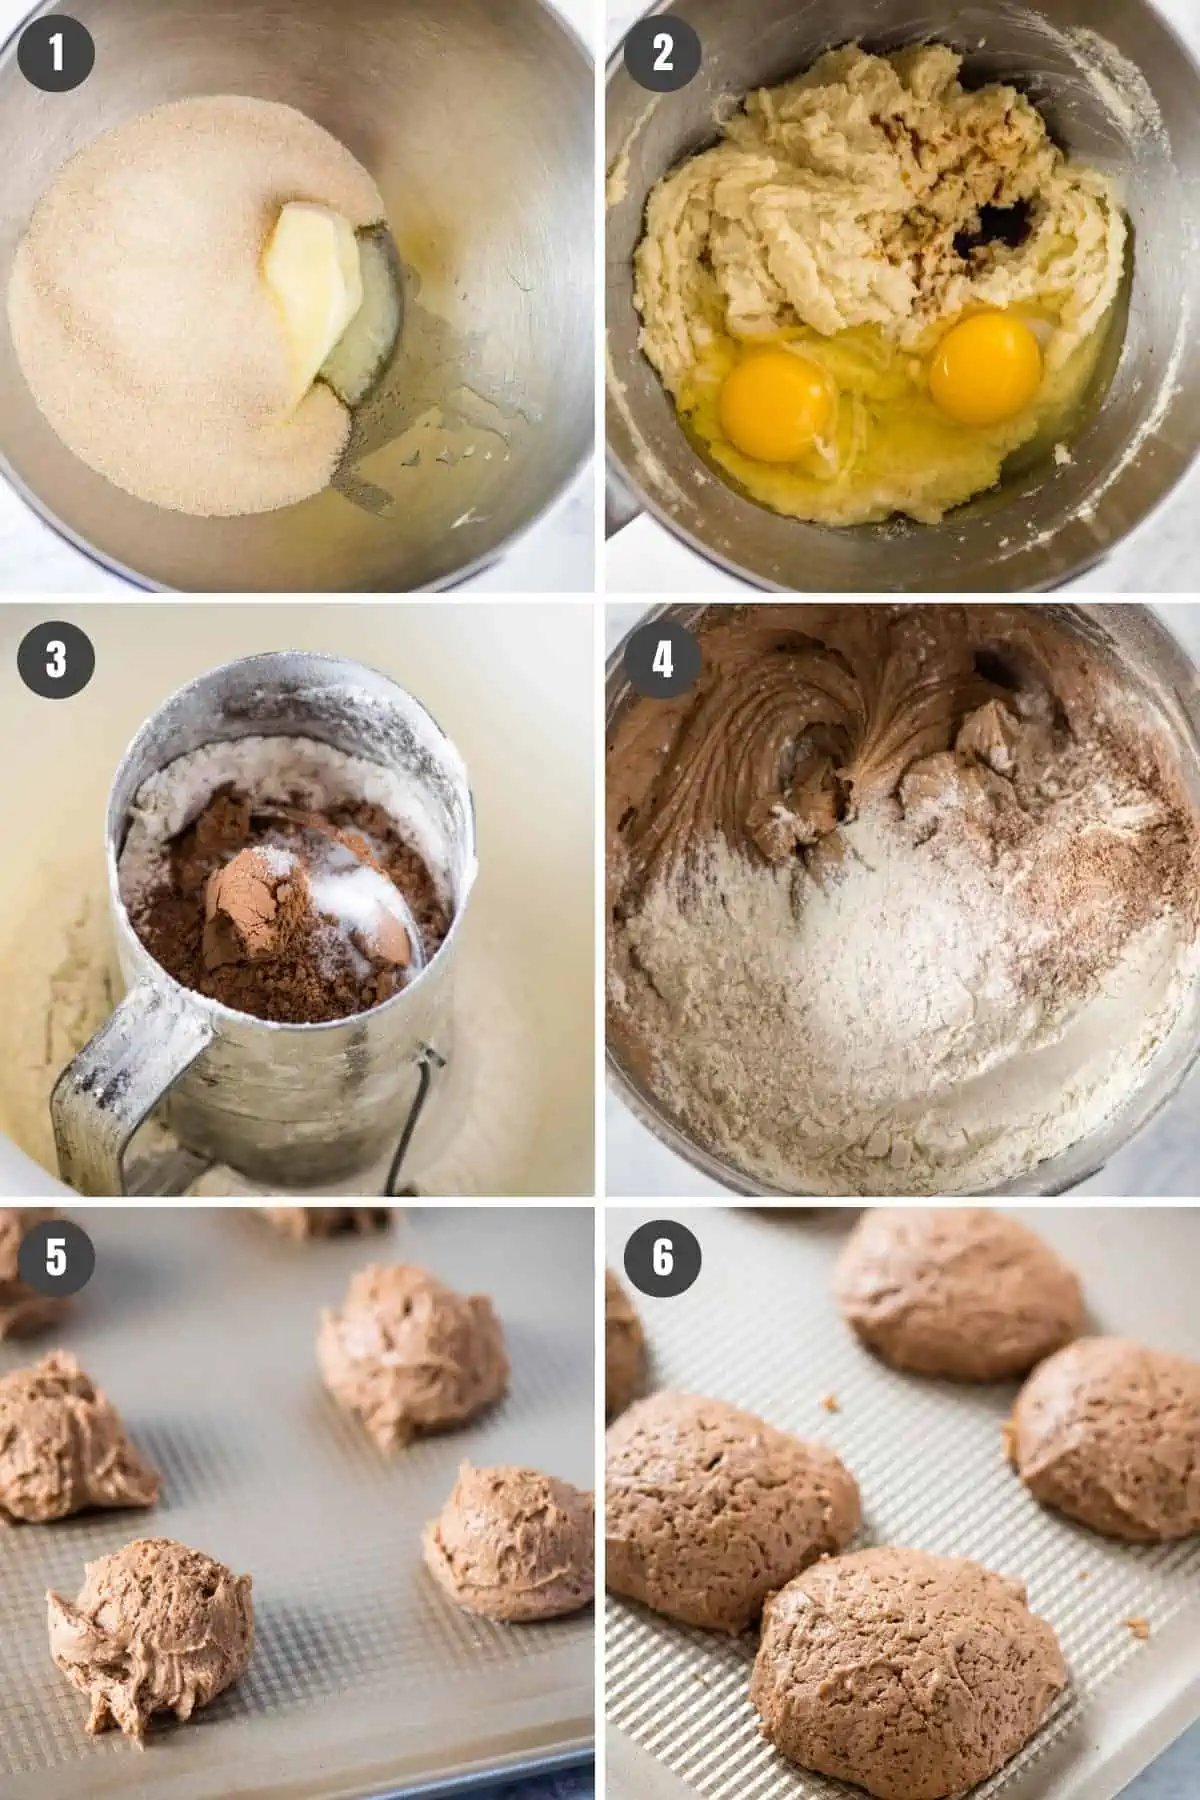 steps for how to make chocolate whoopie pie recipe in KitchenAid bowl, mixing butter and sugar, eggs and vanilla, dry ingredients and milk, scooping cookies, and baking on cookie sheet